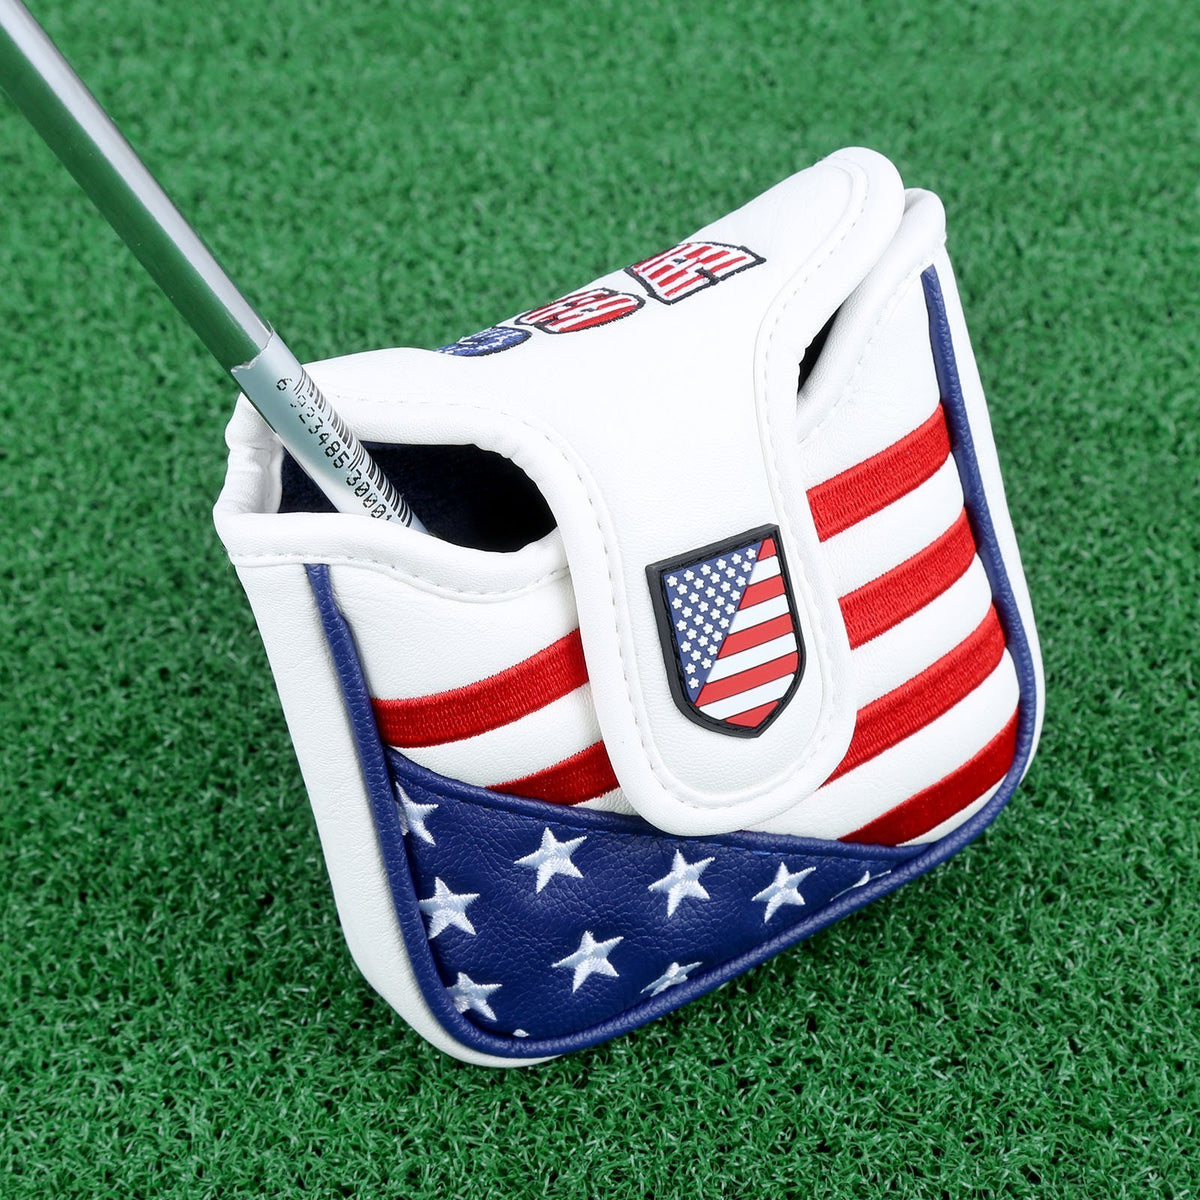 Club Head Cover - 1 Pc Magnetic Closure Golf Mallet Putter Covers Headcover PU Leather Flag Style Square Golf Club Head Cover Headcovers